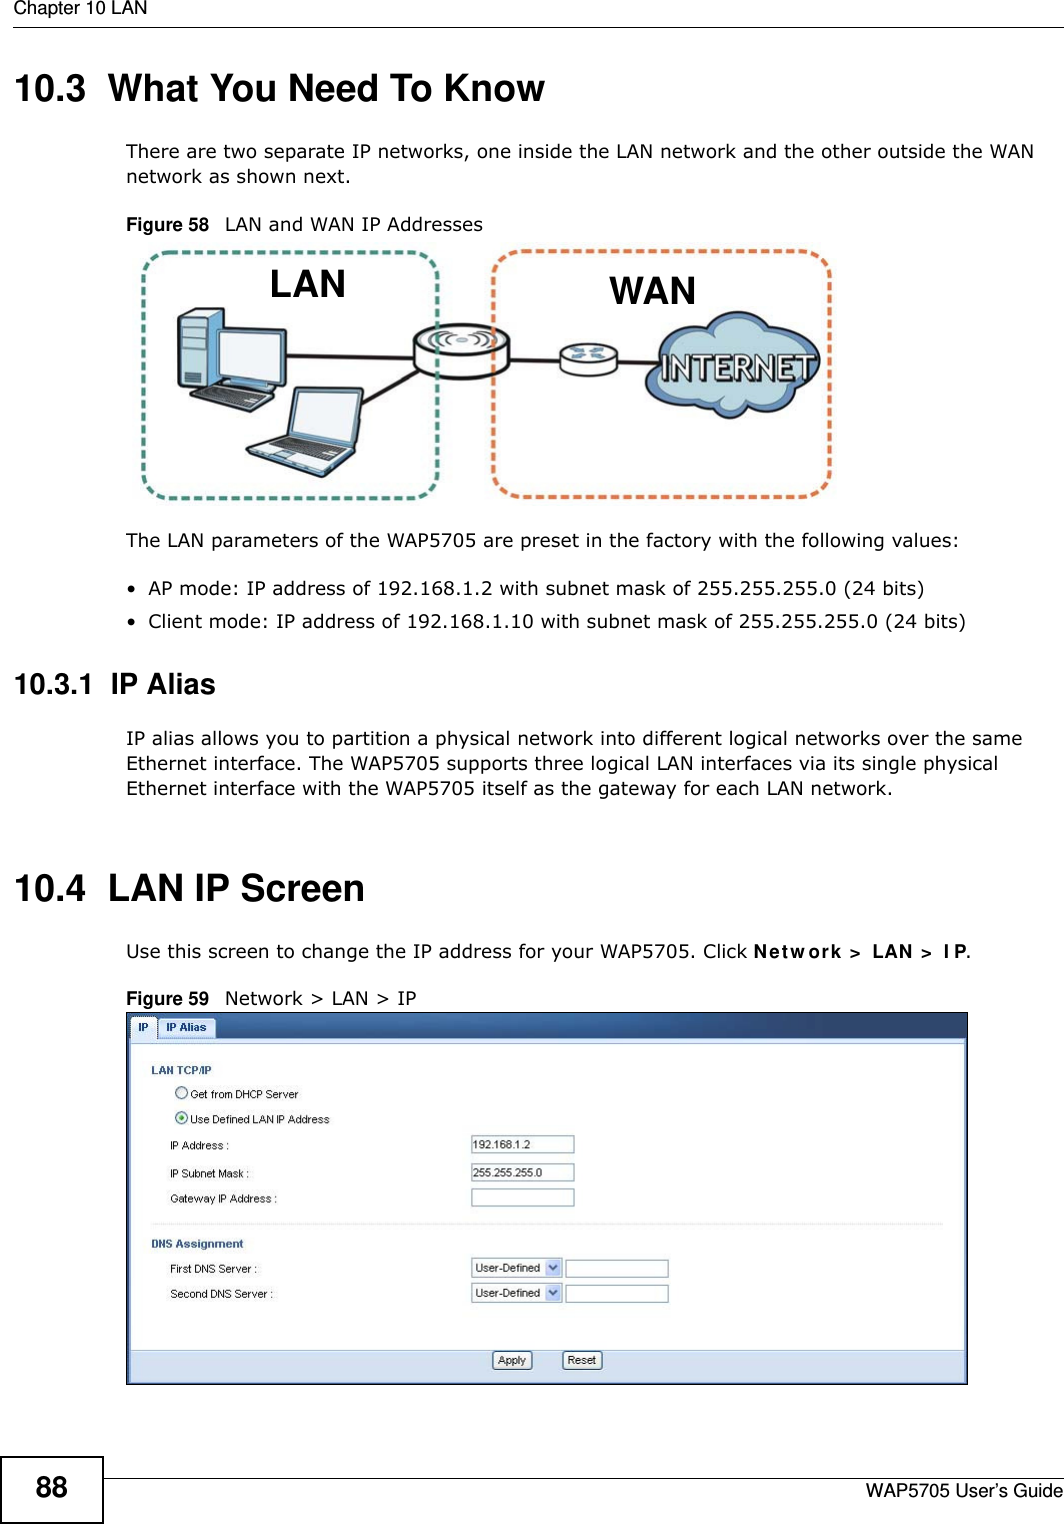 Chapter 10 LANWAP5705 User’s Guide8810.3  What You Need To KnowThere are two separate IP networks, one inside the LAN network and the other outside the WAN network as shown next.Figure 58   LAN and WAN IP AddressesThe LAN parameters of the WAP5705 are preset in the factory with the following values:• AP mode: IP address of 192.168.1.2 with subnet mask of 255.255.255.0 (24 bits)• Client mode: IP address of 192.168.1.10 with subnet mask of 255.255.255.0 (24 bits)10.3.1  IP AliasIP alias allows you to partition a physical network into different logical networks over the same Ethernet interface. The WAP5705 supports three logical LAN interfaces via its single physical Ethernet interface with the WAP5705 itself as the gateway for each LAN network.10.4  LAN IP Screen   Use this screen to change the IP address for your WAP5705. Click Ne t w or k  &gt;  LAN  &gt;  I P.Figure 59   Network &gt; LAN &gt; IP WANLAN